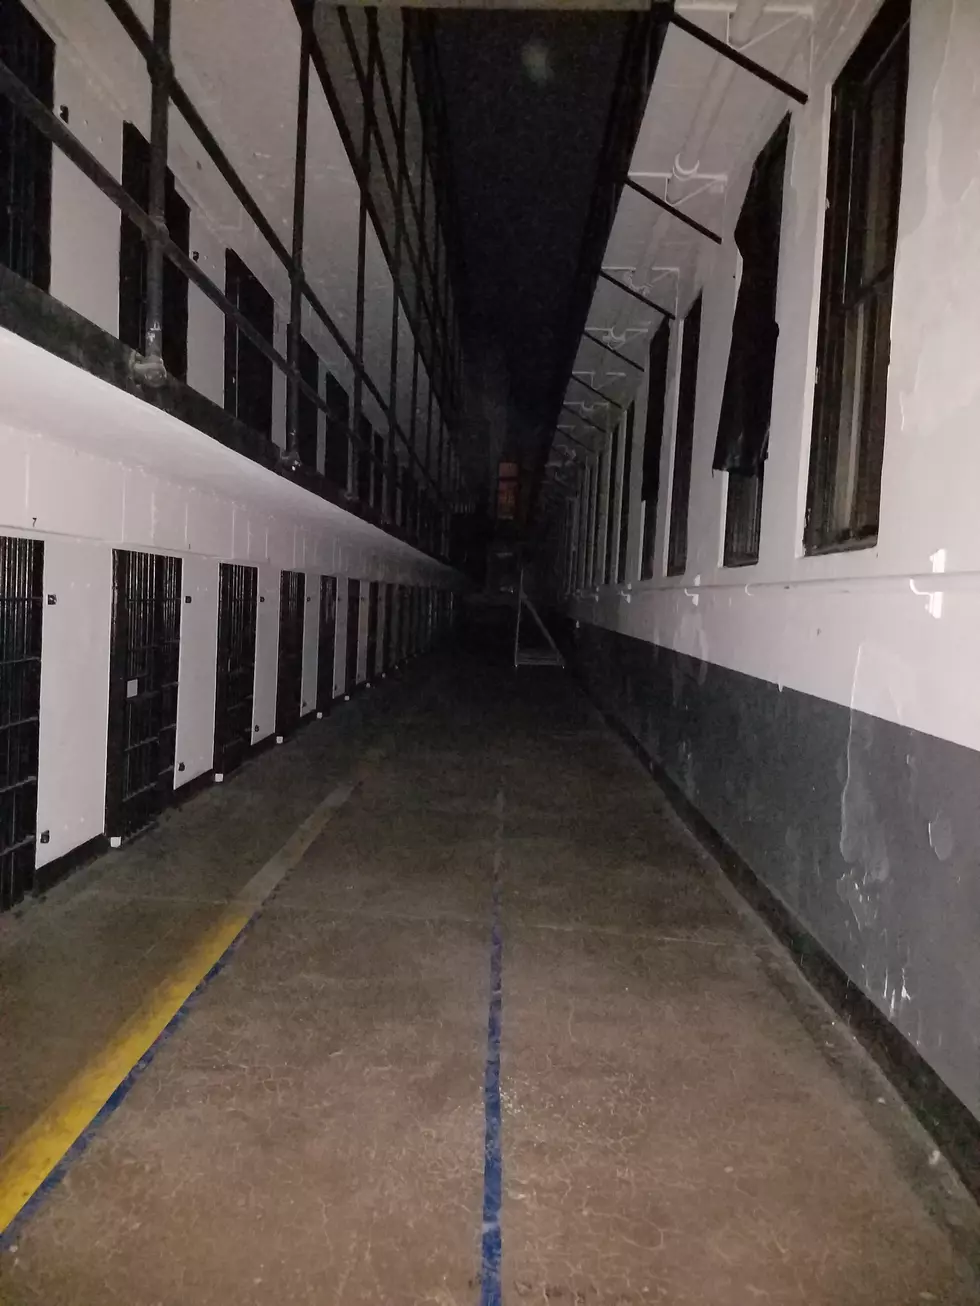 Be Part of the 2019 Blaze Ghost Hunt Team at Old MT State Prison